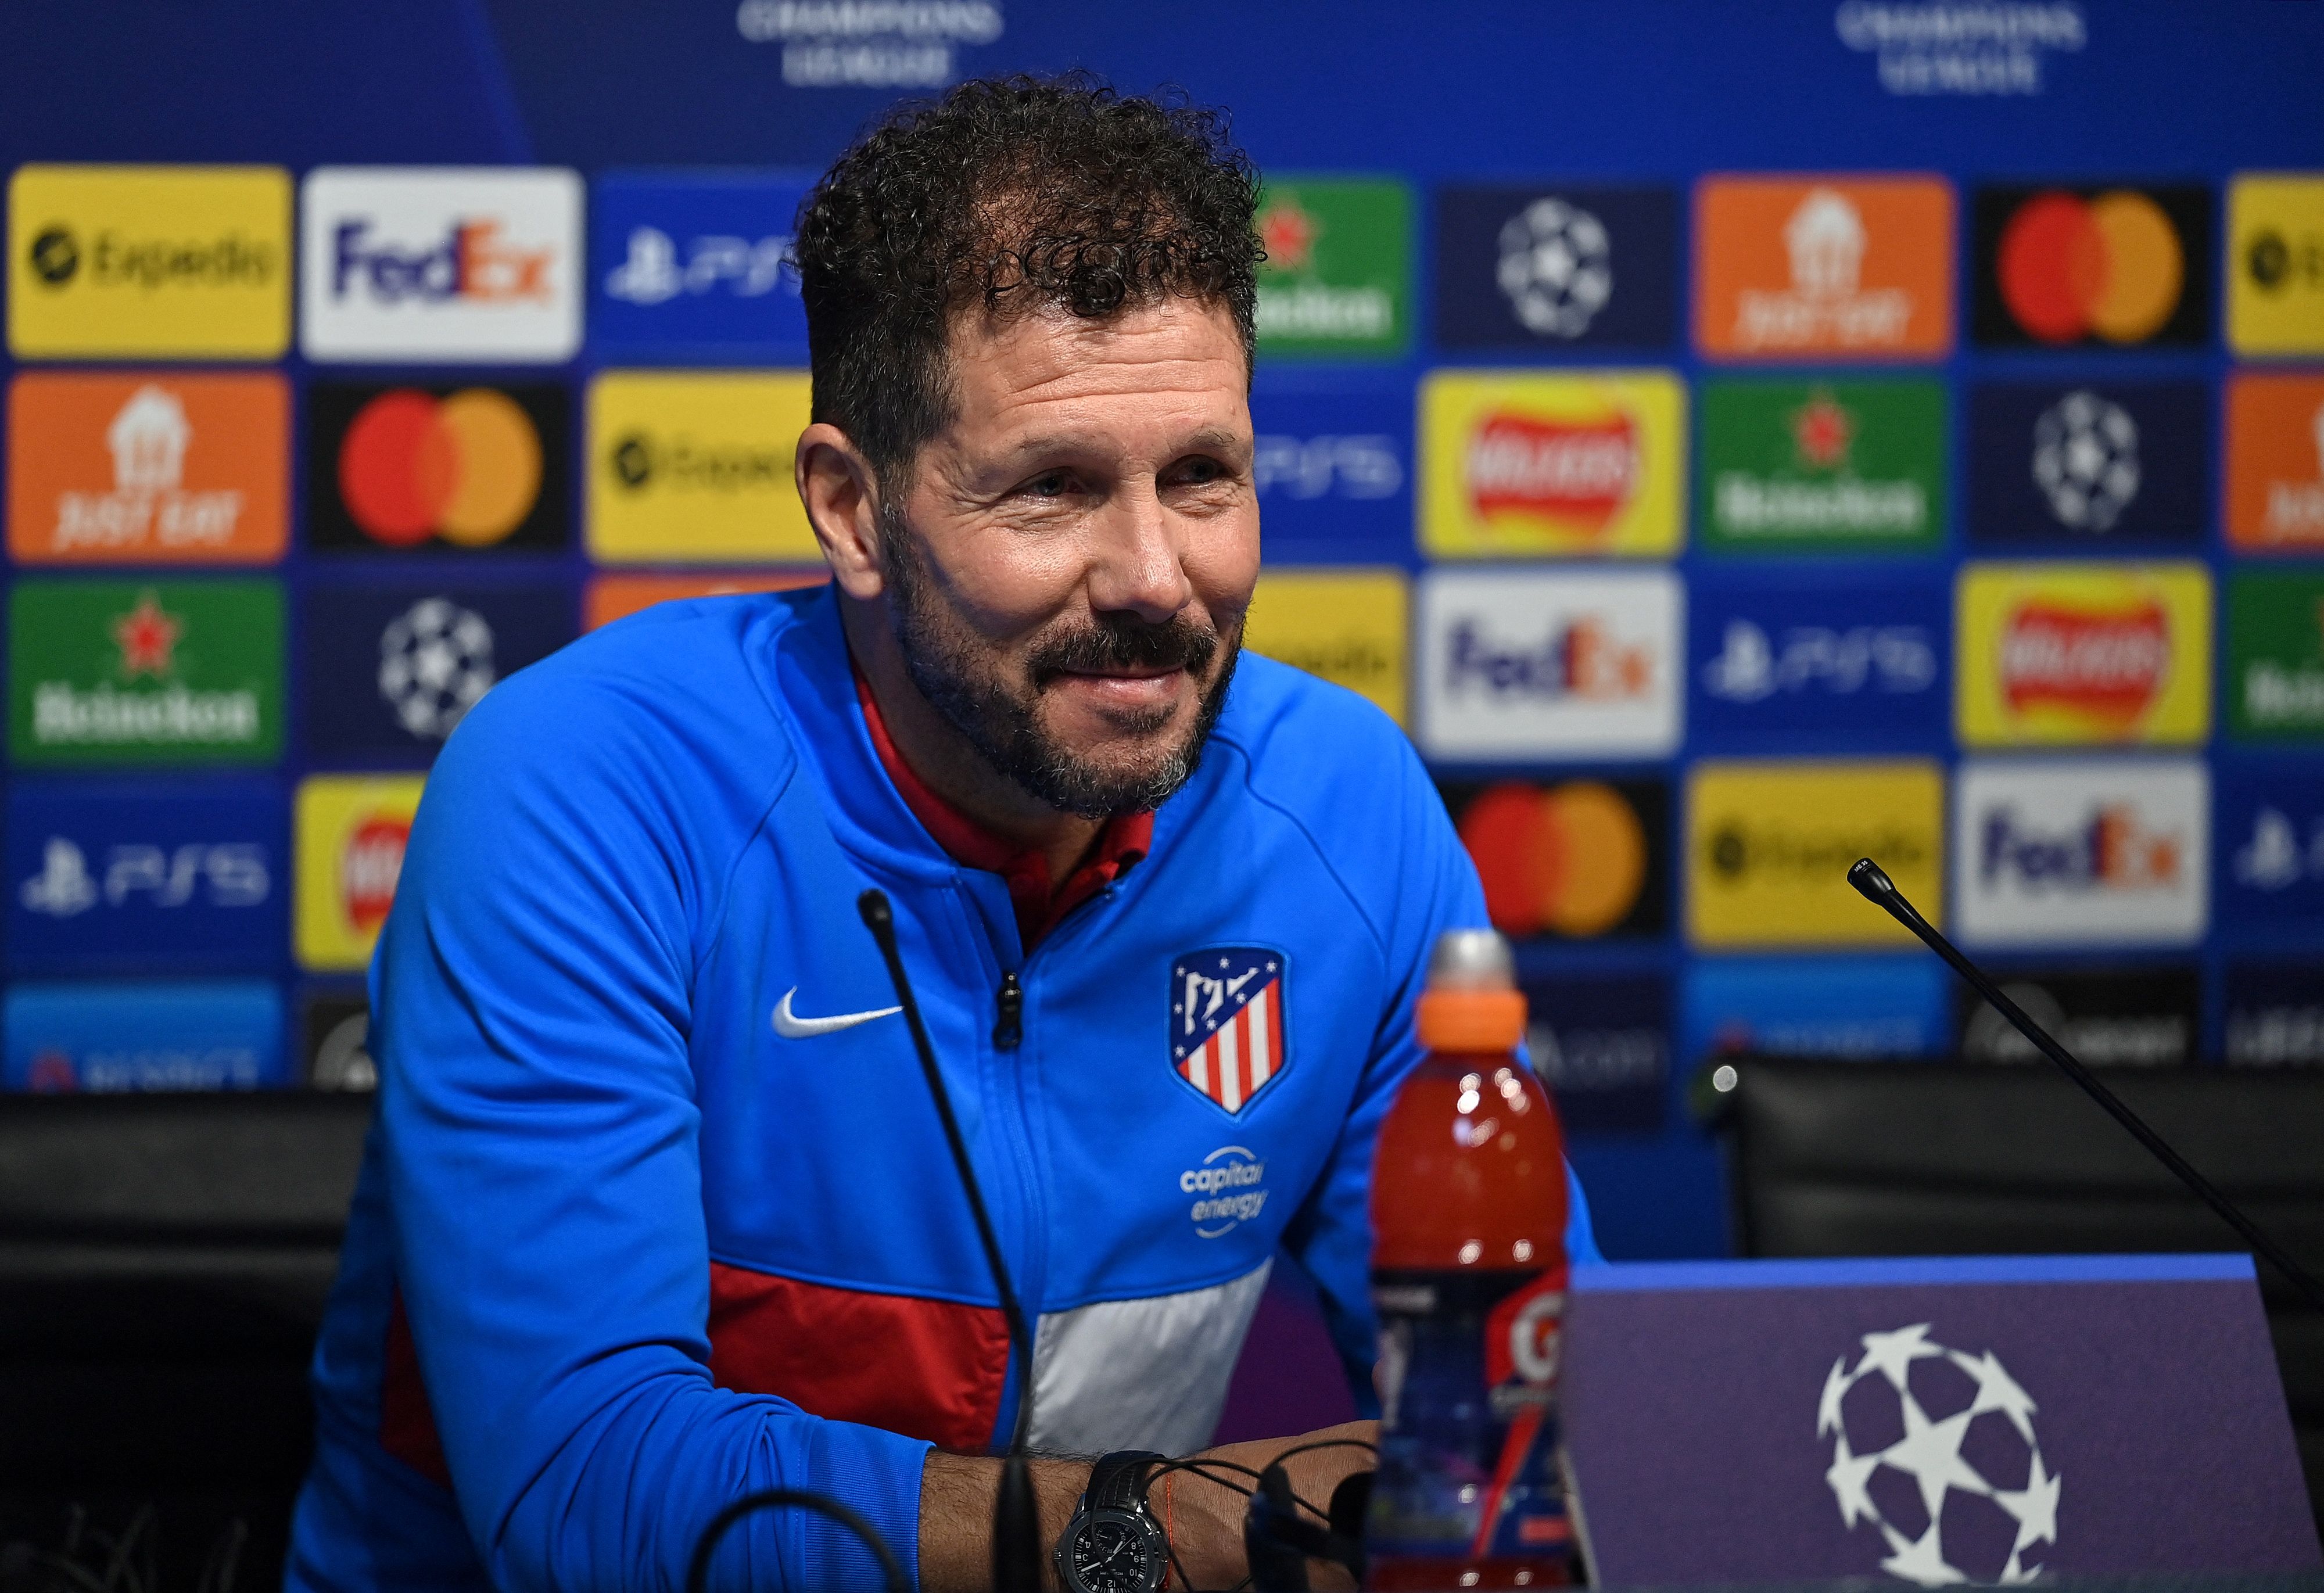 Atletico Madrid outperforming Manchester City and Napoli as most in-form side in Europe’s big leagues